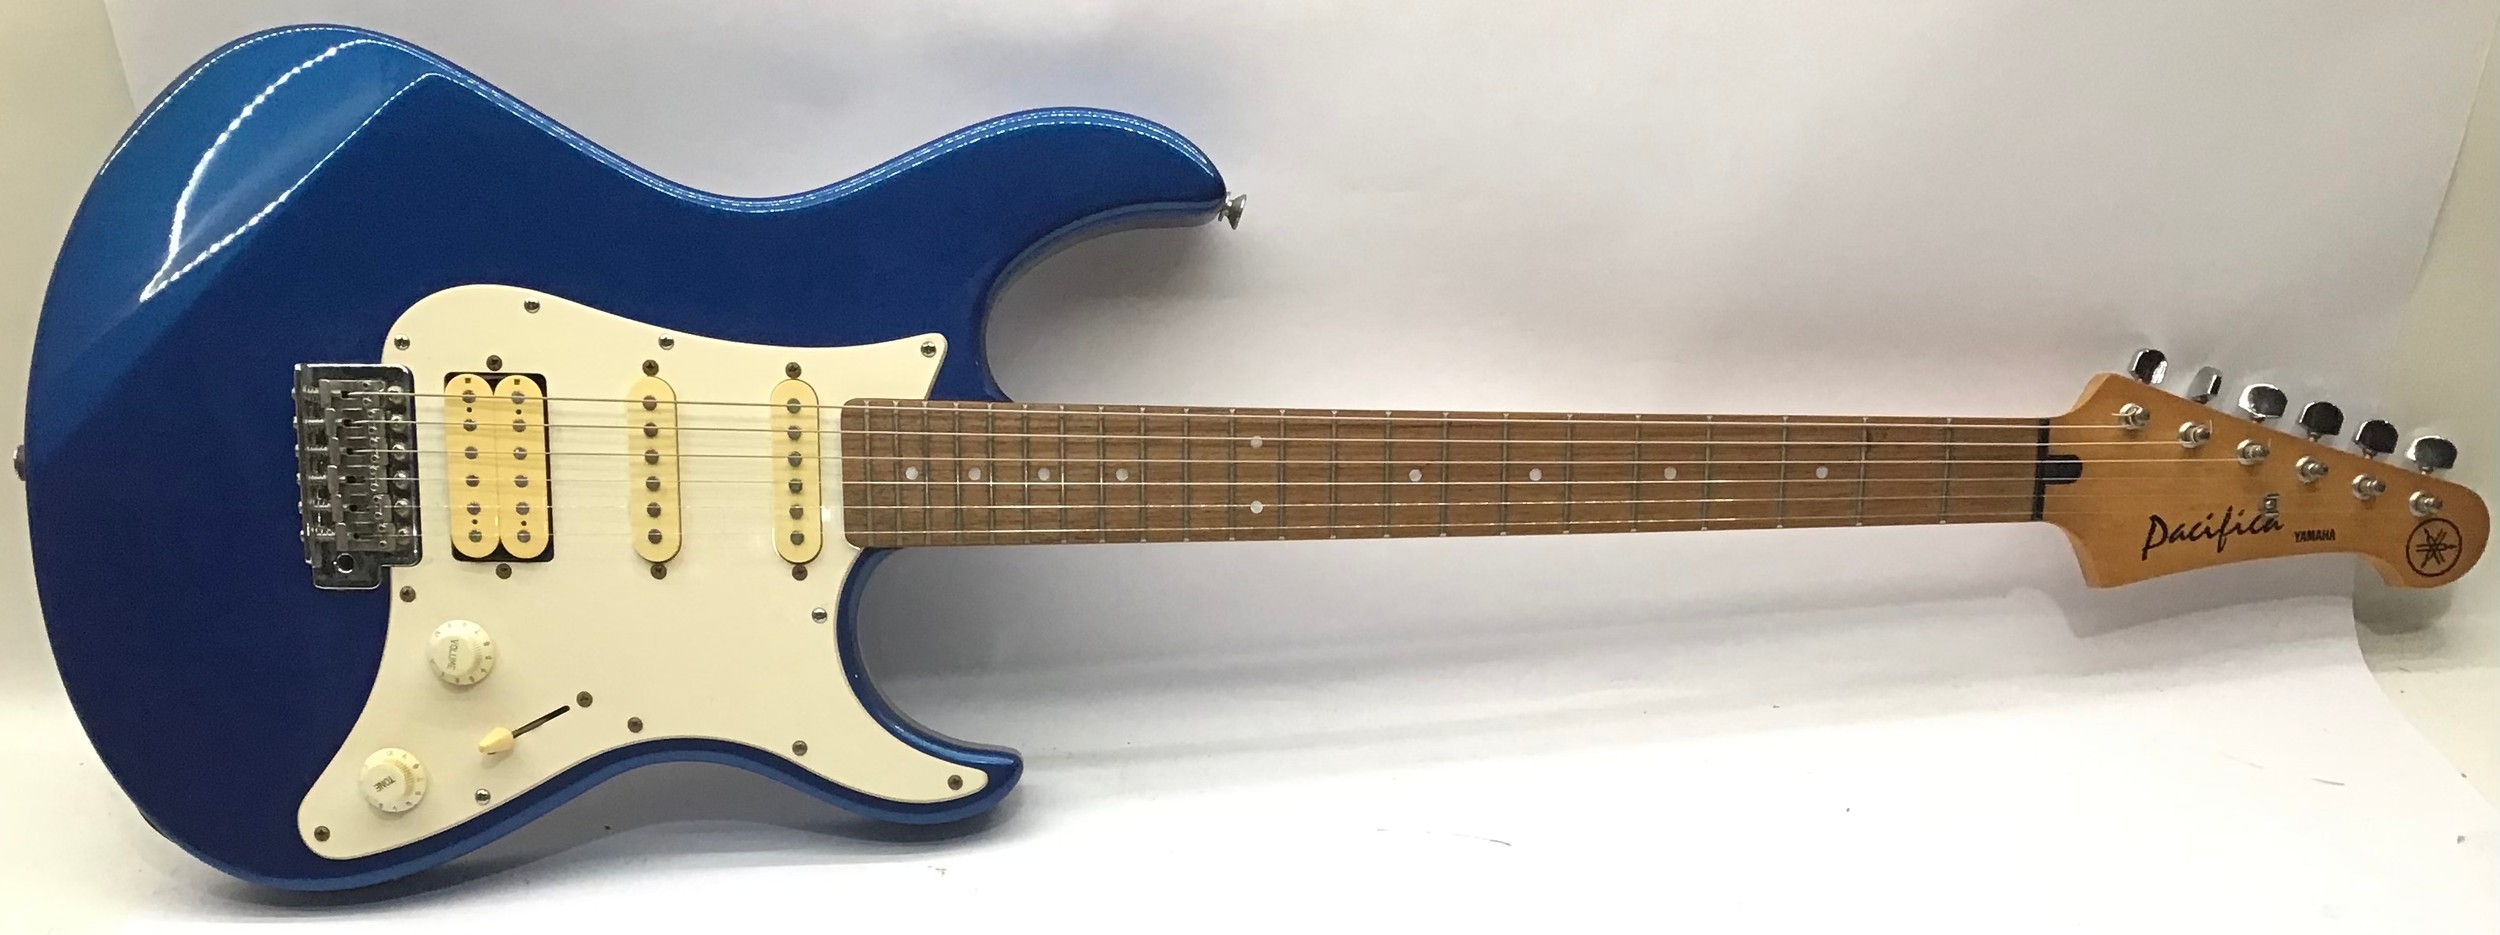 YAMAHA PACIFICA ELECTRIC GUITAR. This is a fantastic guitar for a learner upwards and found here